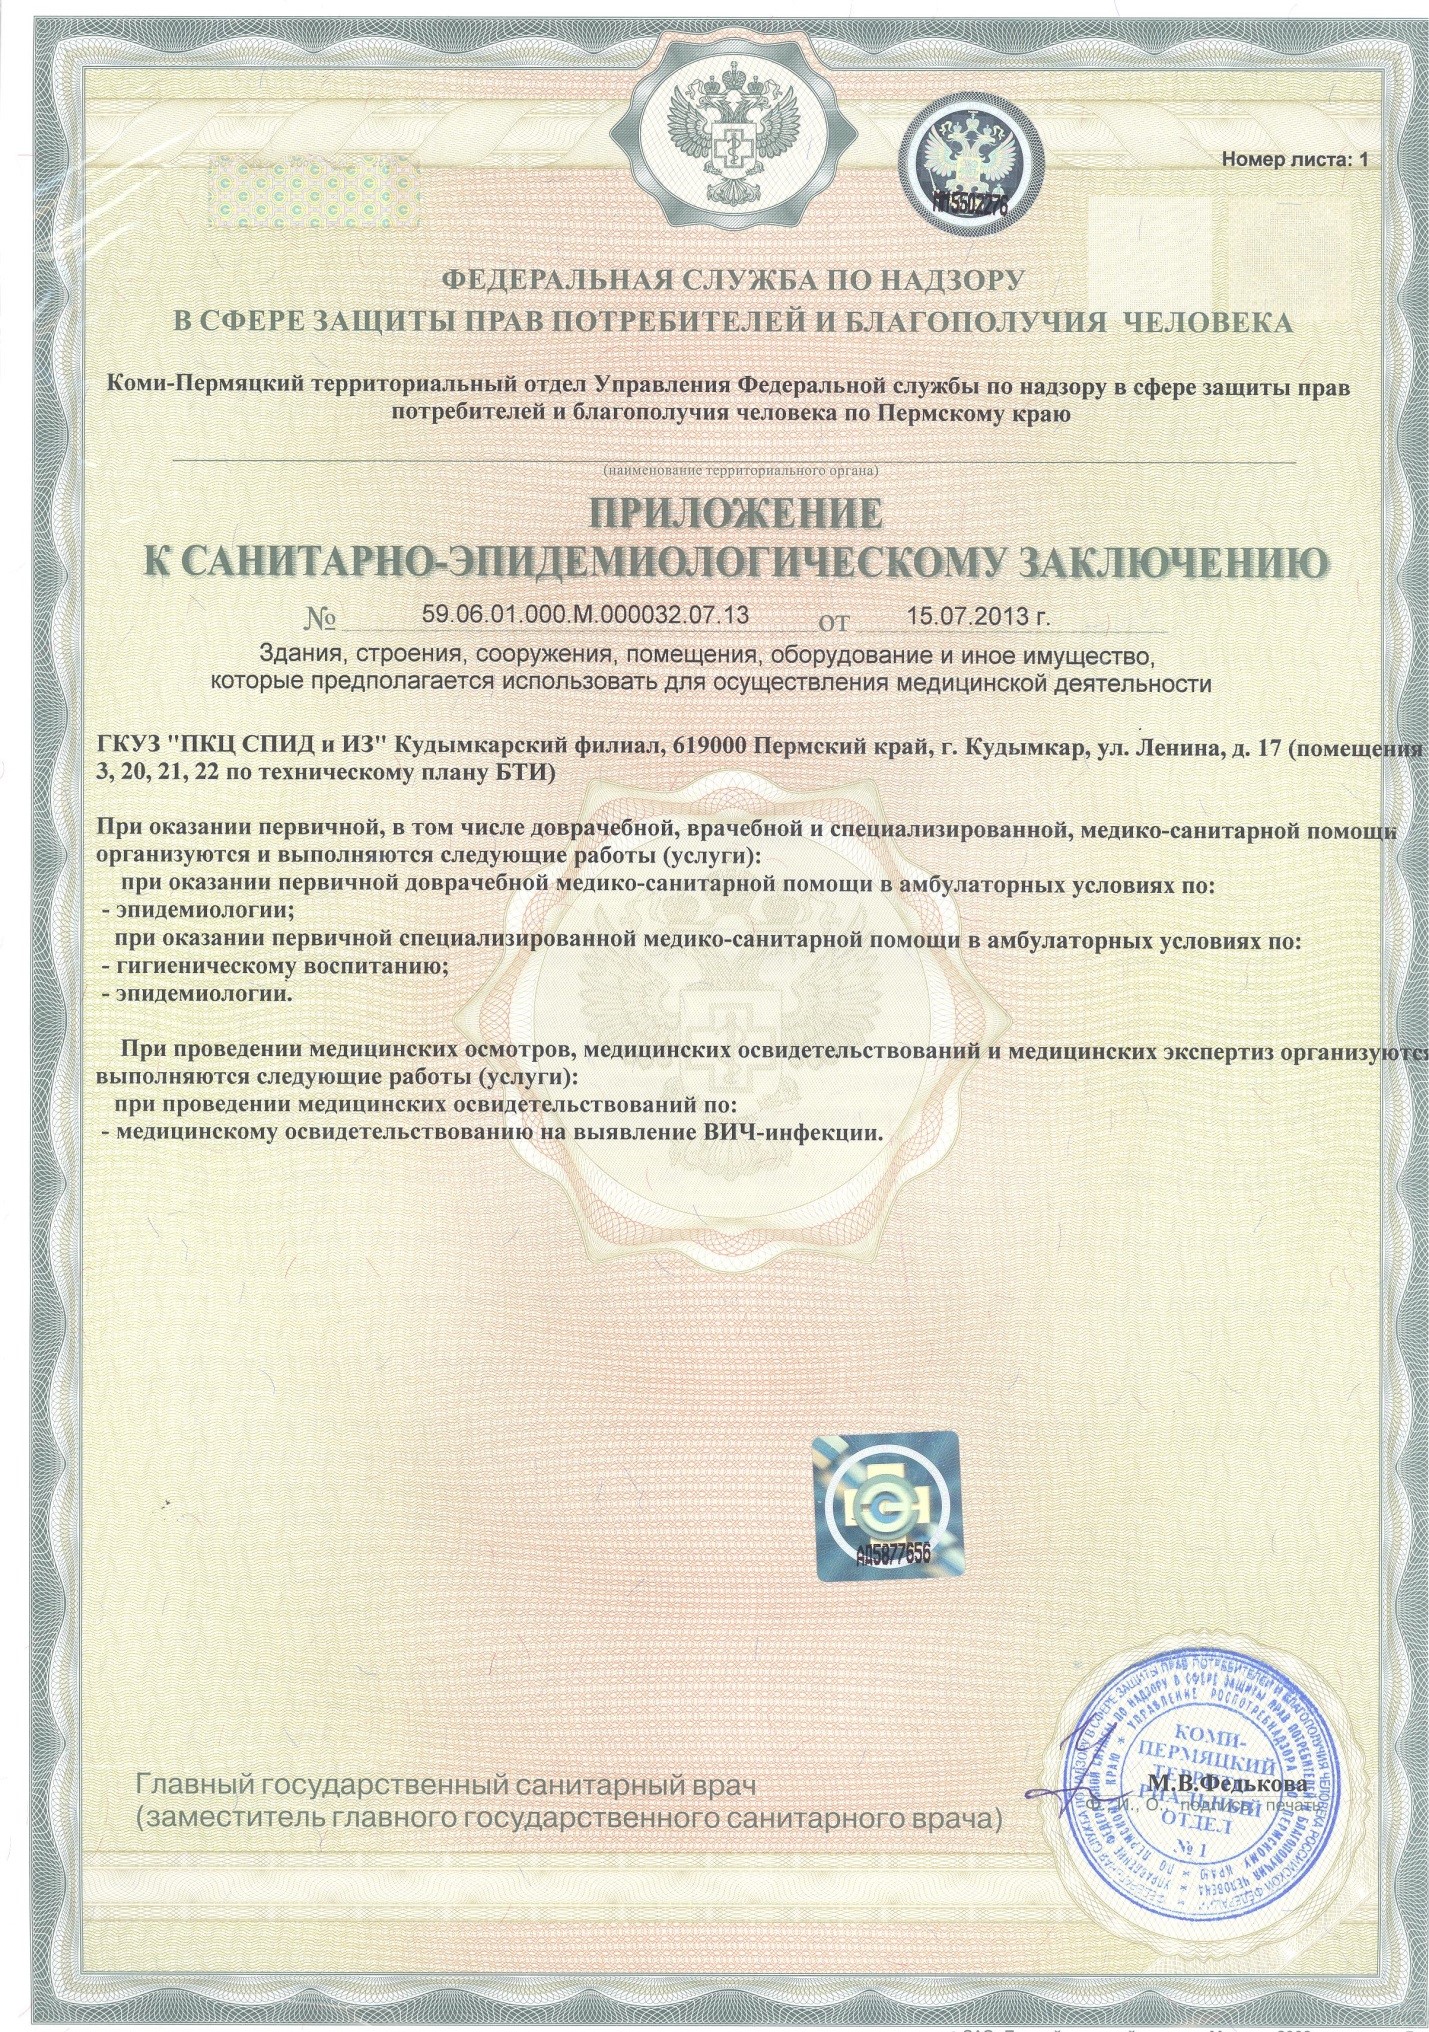 Sanitary-epidemiological certificate9